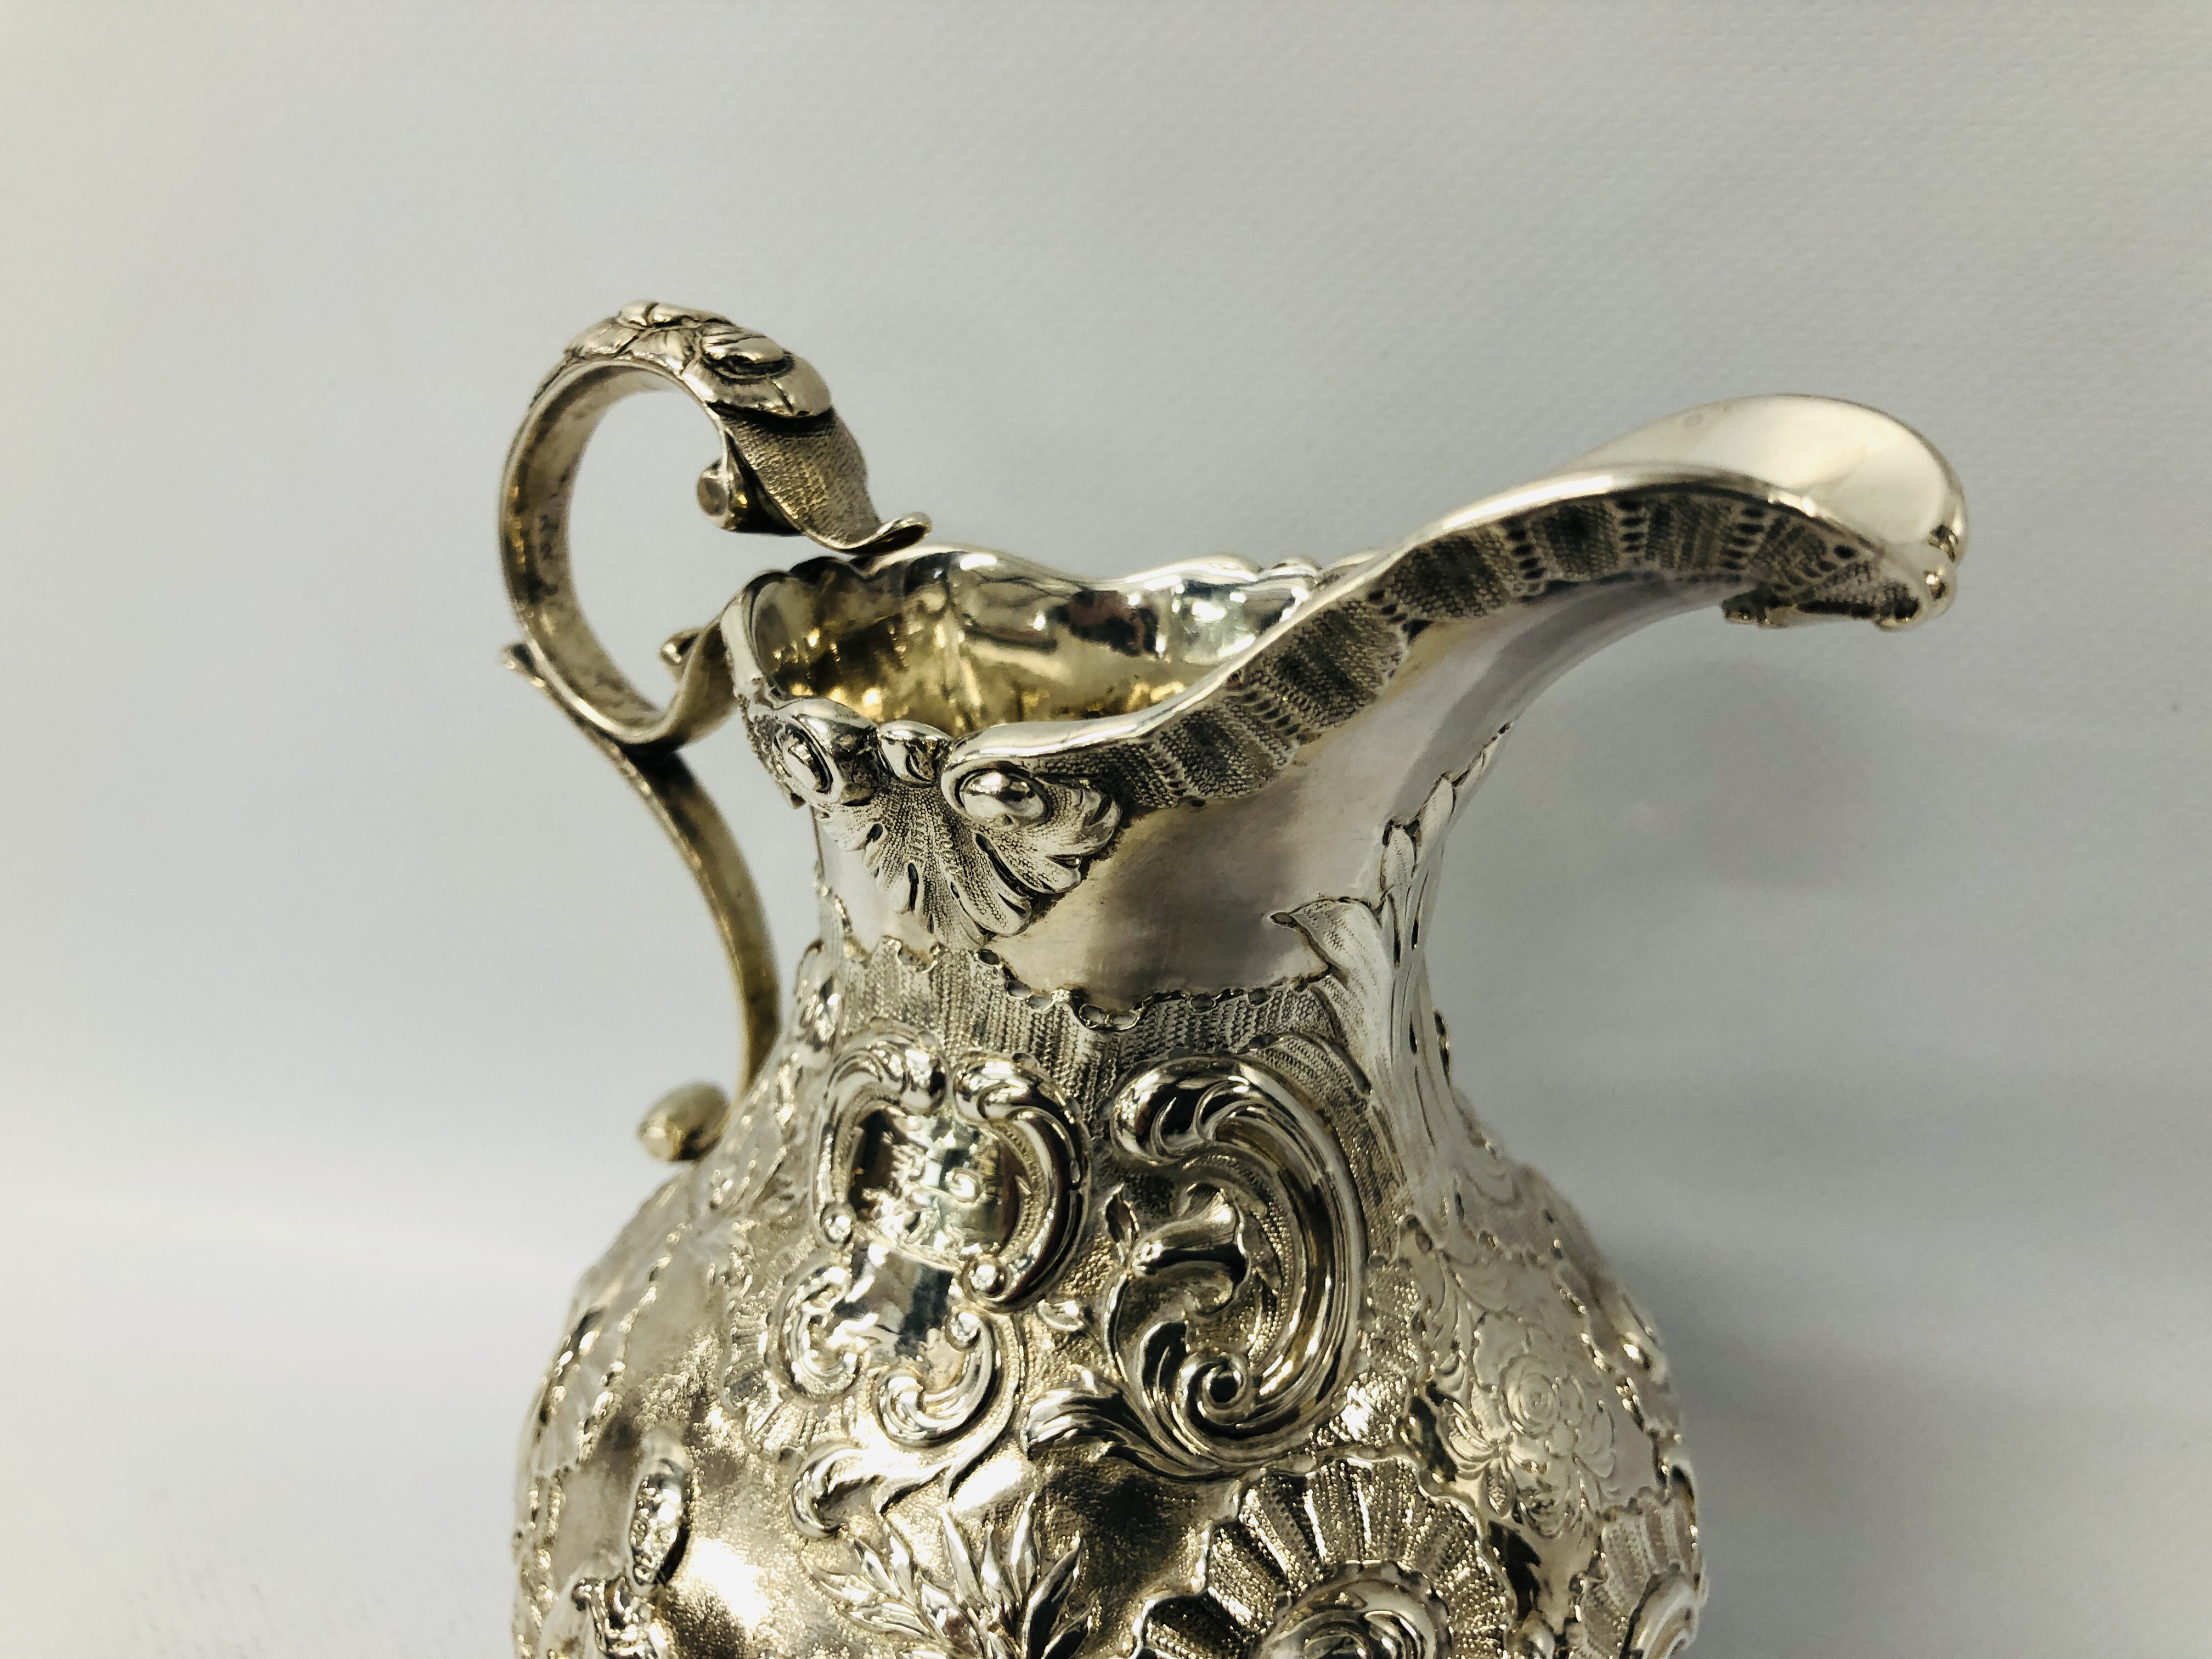 A SILVER MILK JUG OF ROCOCO DESIGN DECORATED WITH CHINOISERIE FIGURES WITH INSCRIPTION MR AND MRS J. - Image 15 of 25